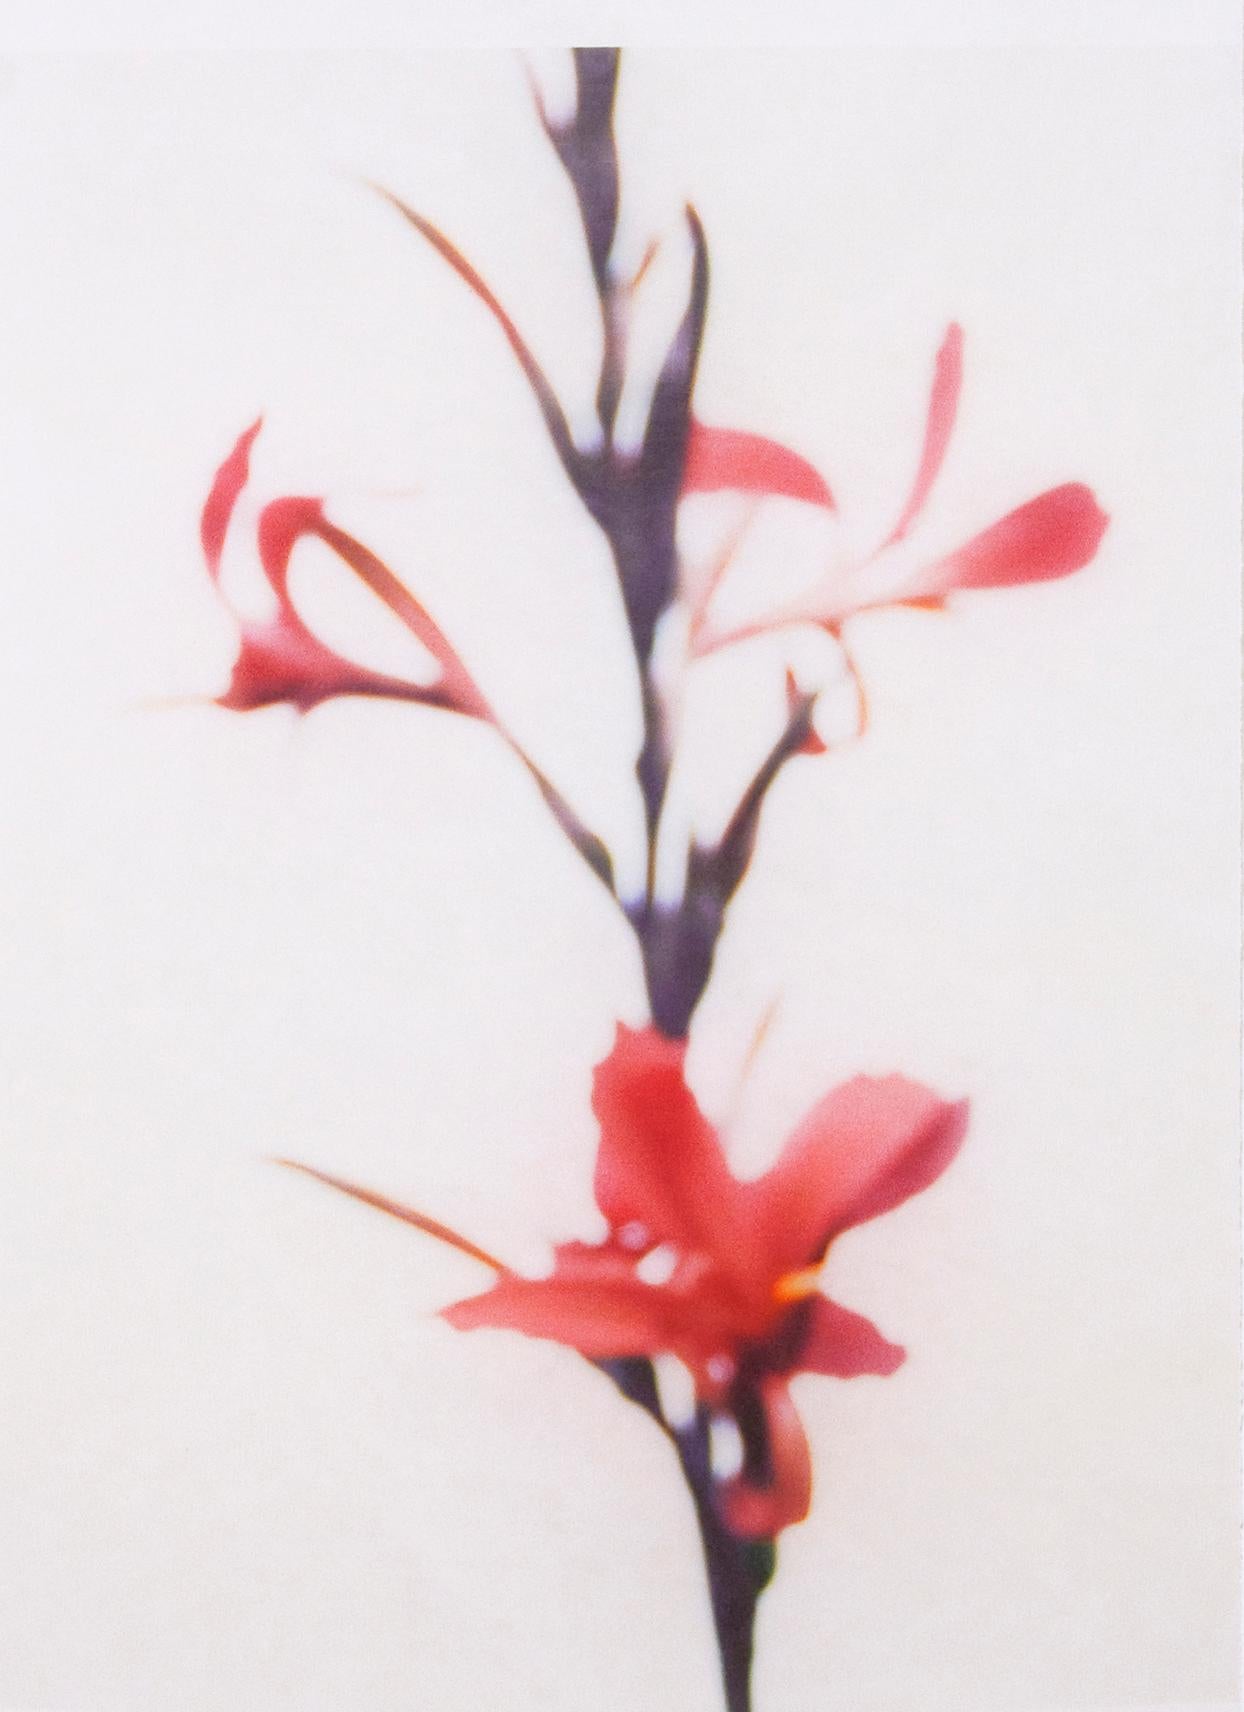 Canna No. 6 (Abstracted Still Life Photograph of a Magenta Lily Flower on White)